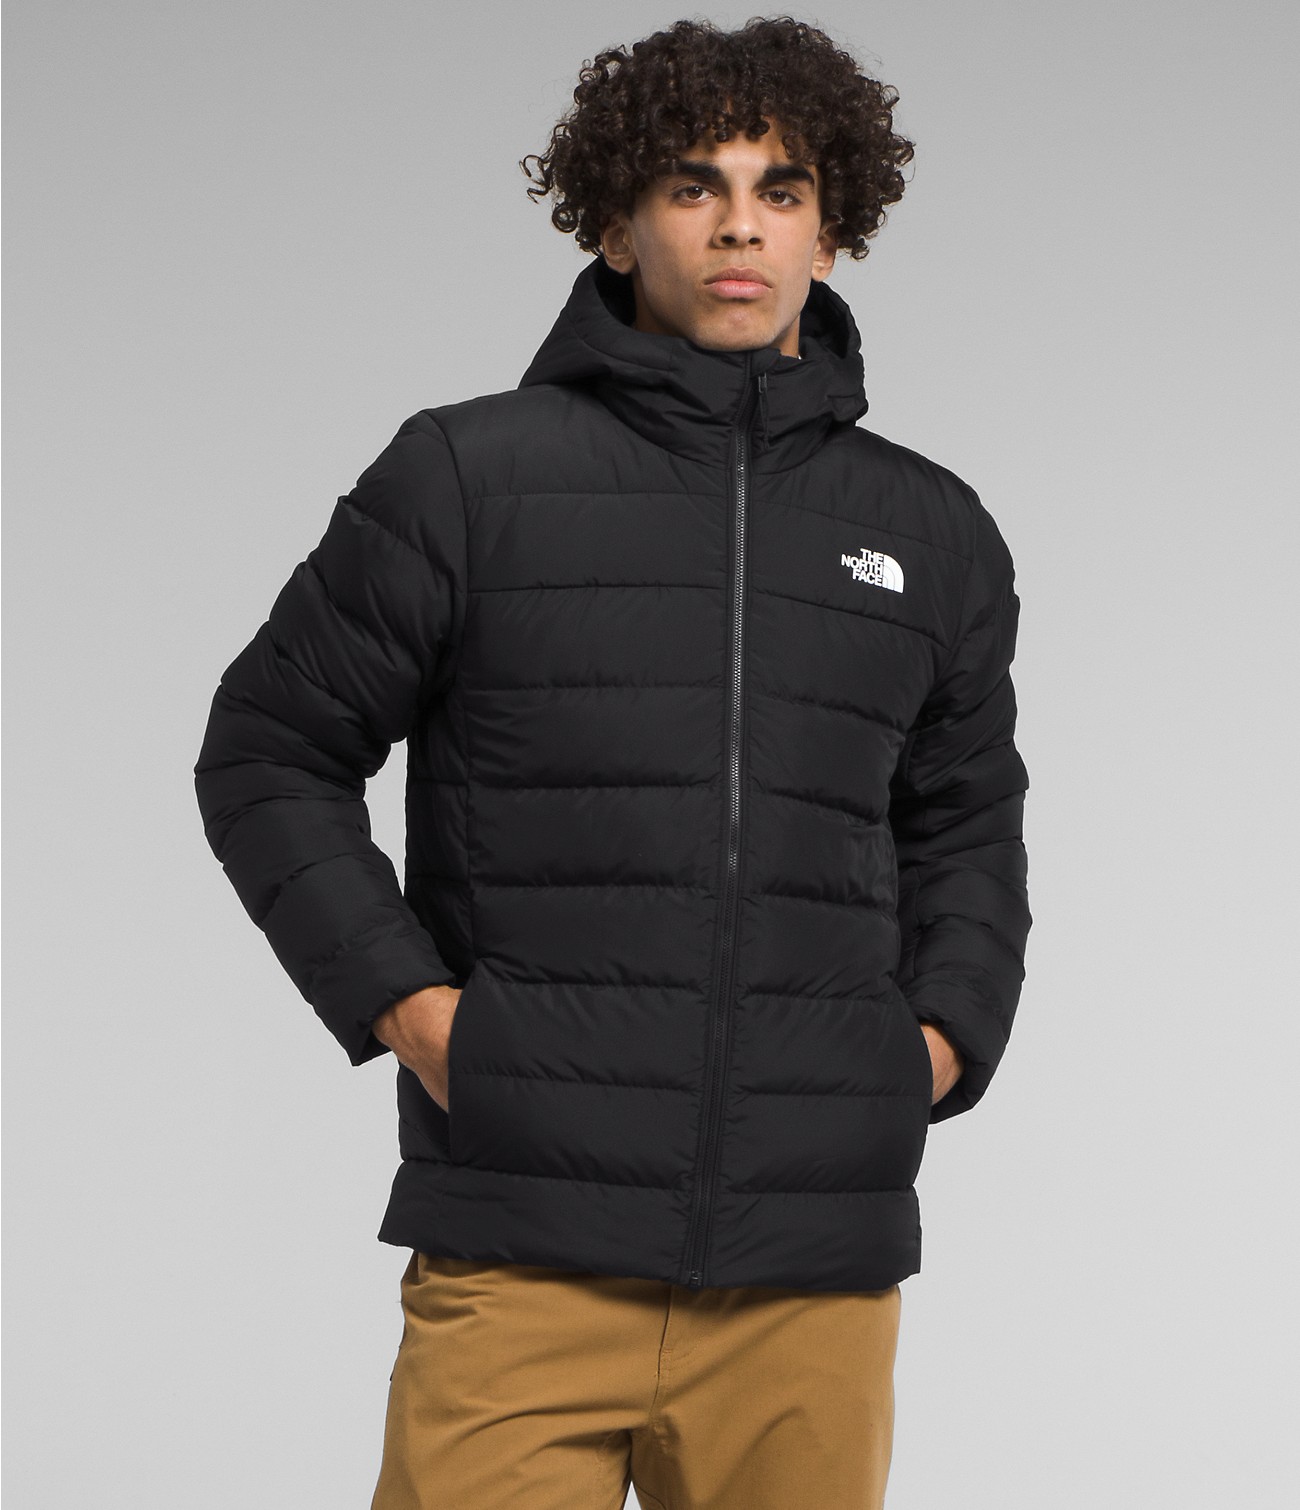 Unlock Wilderness' choice in the Geographical Norway Vs North Face comparison, the Aconcagua 3 Hoodie by The North Face